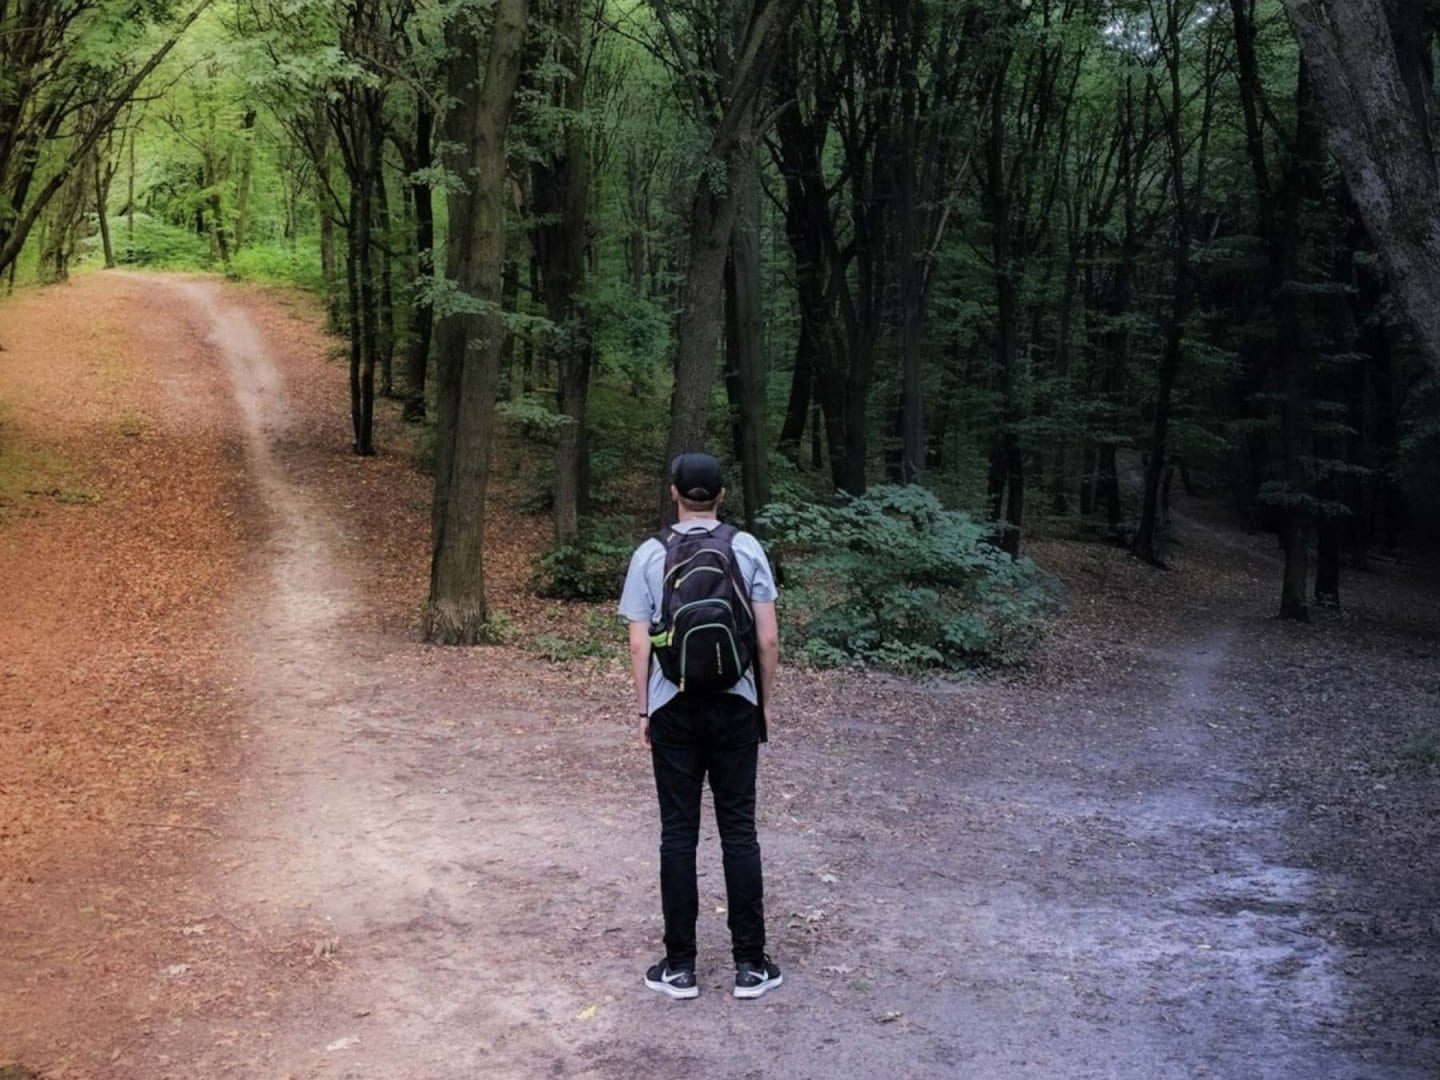 A teen stands at the meeting point of two trails in the forest, one leading higher towards the light and one leading down into darkness